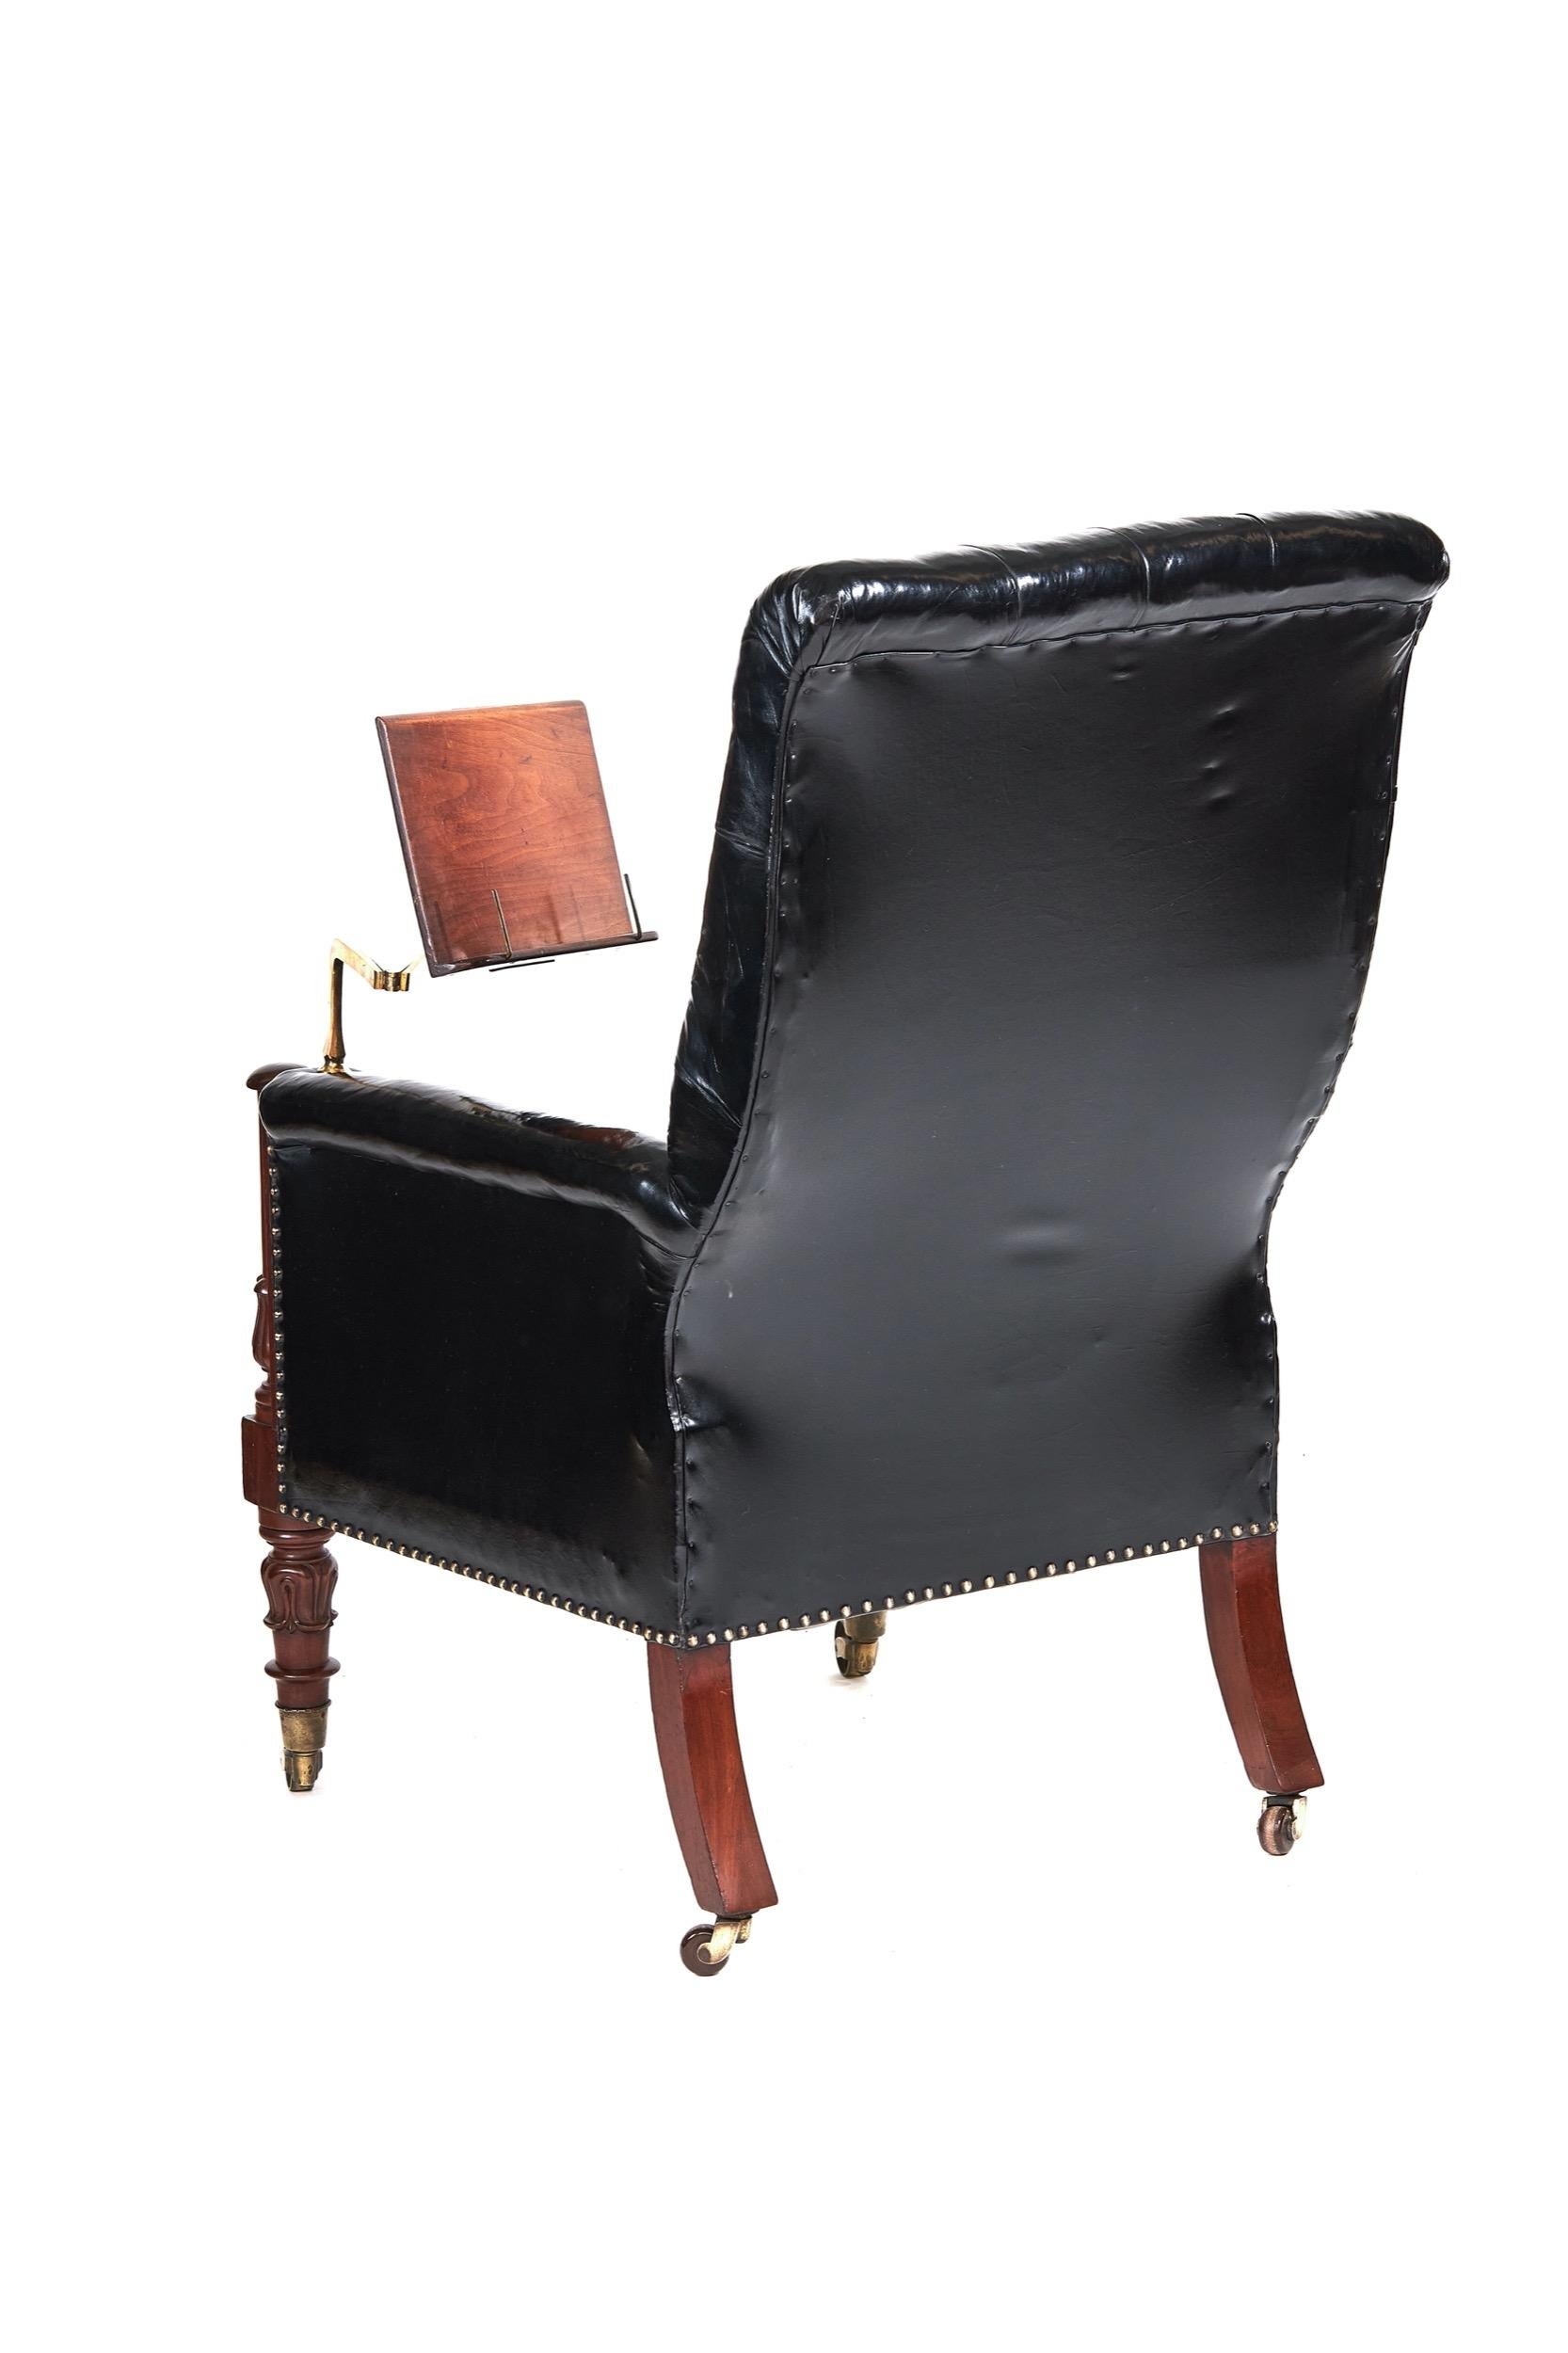 W1V Period Mahogany & leather library chair with Lectern
Deep Buttoned Black leather upholstery, 
Mahogany showframe front with:
Turned column & carved Tulip detail, 
with Pair Tulip carved & turned front legs, with brass cup castors
Lectern with